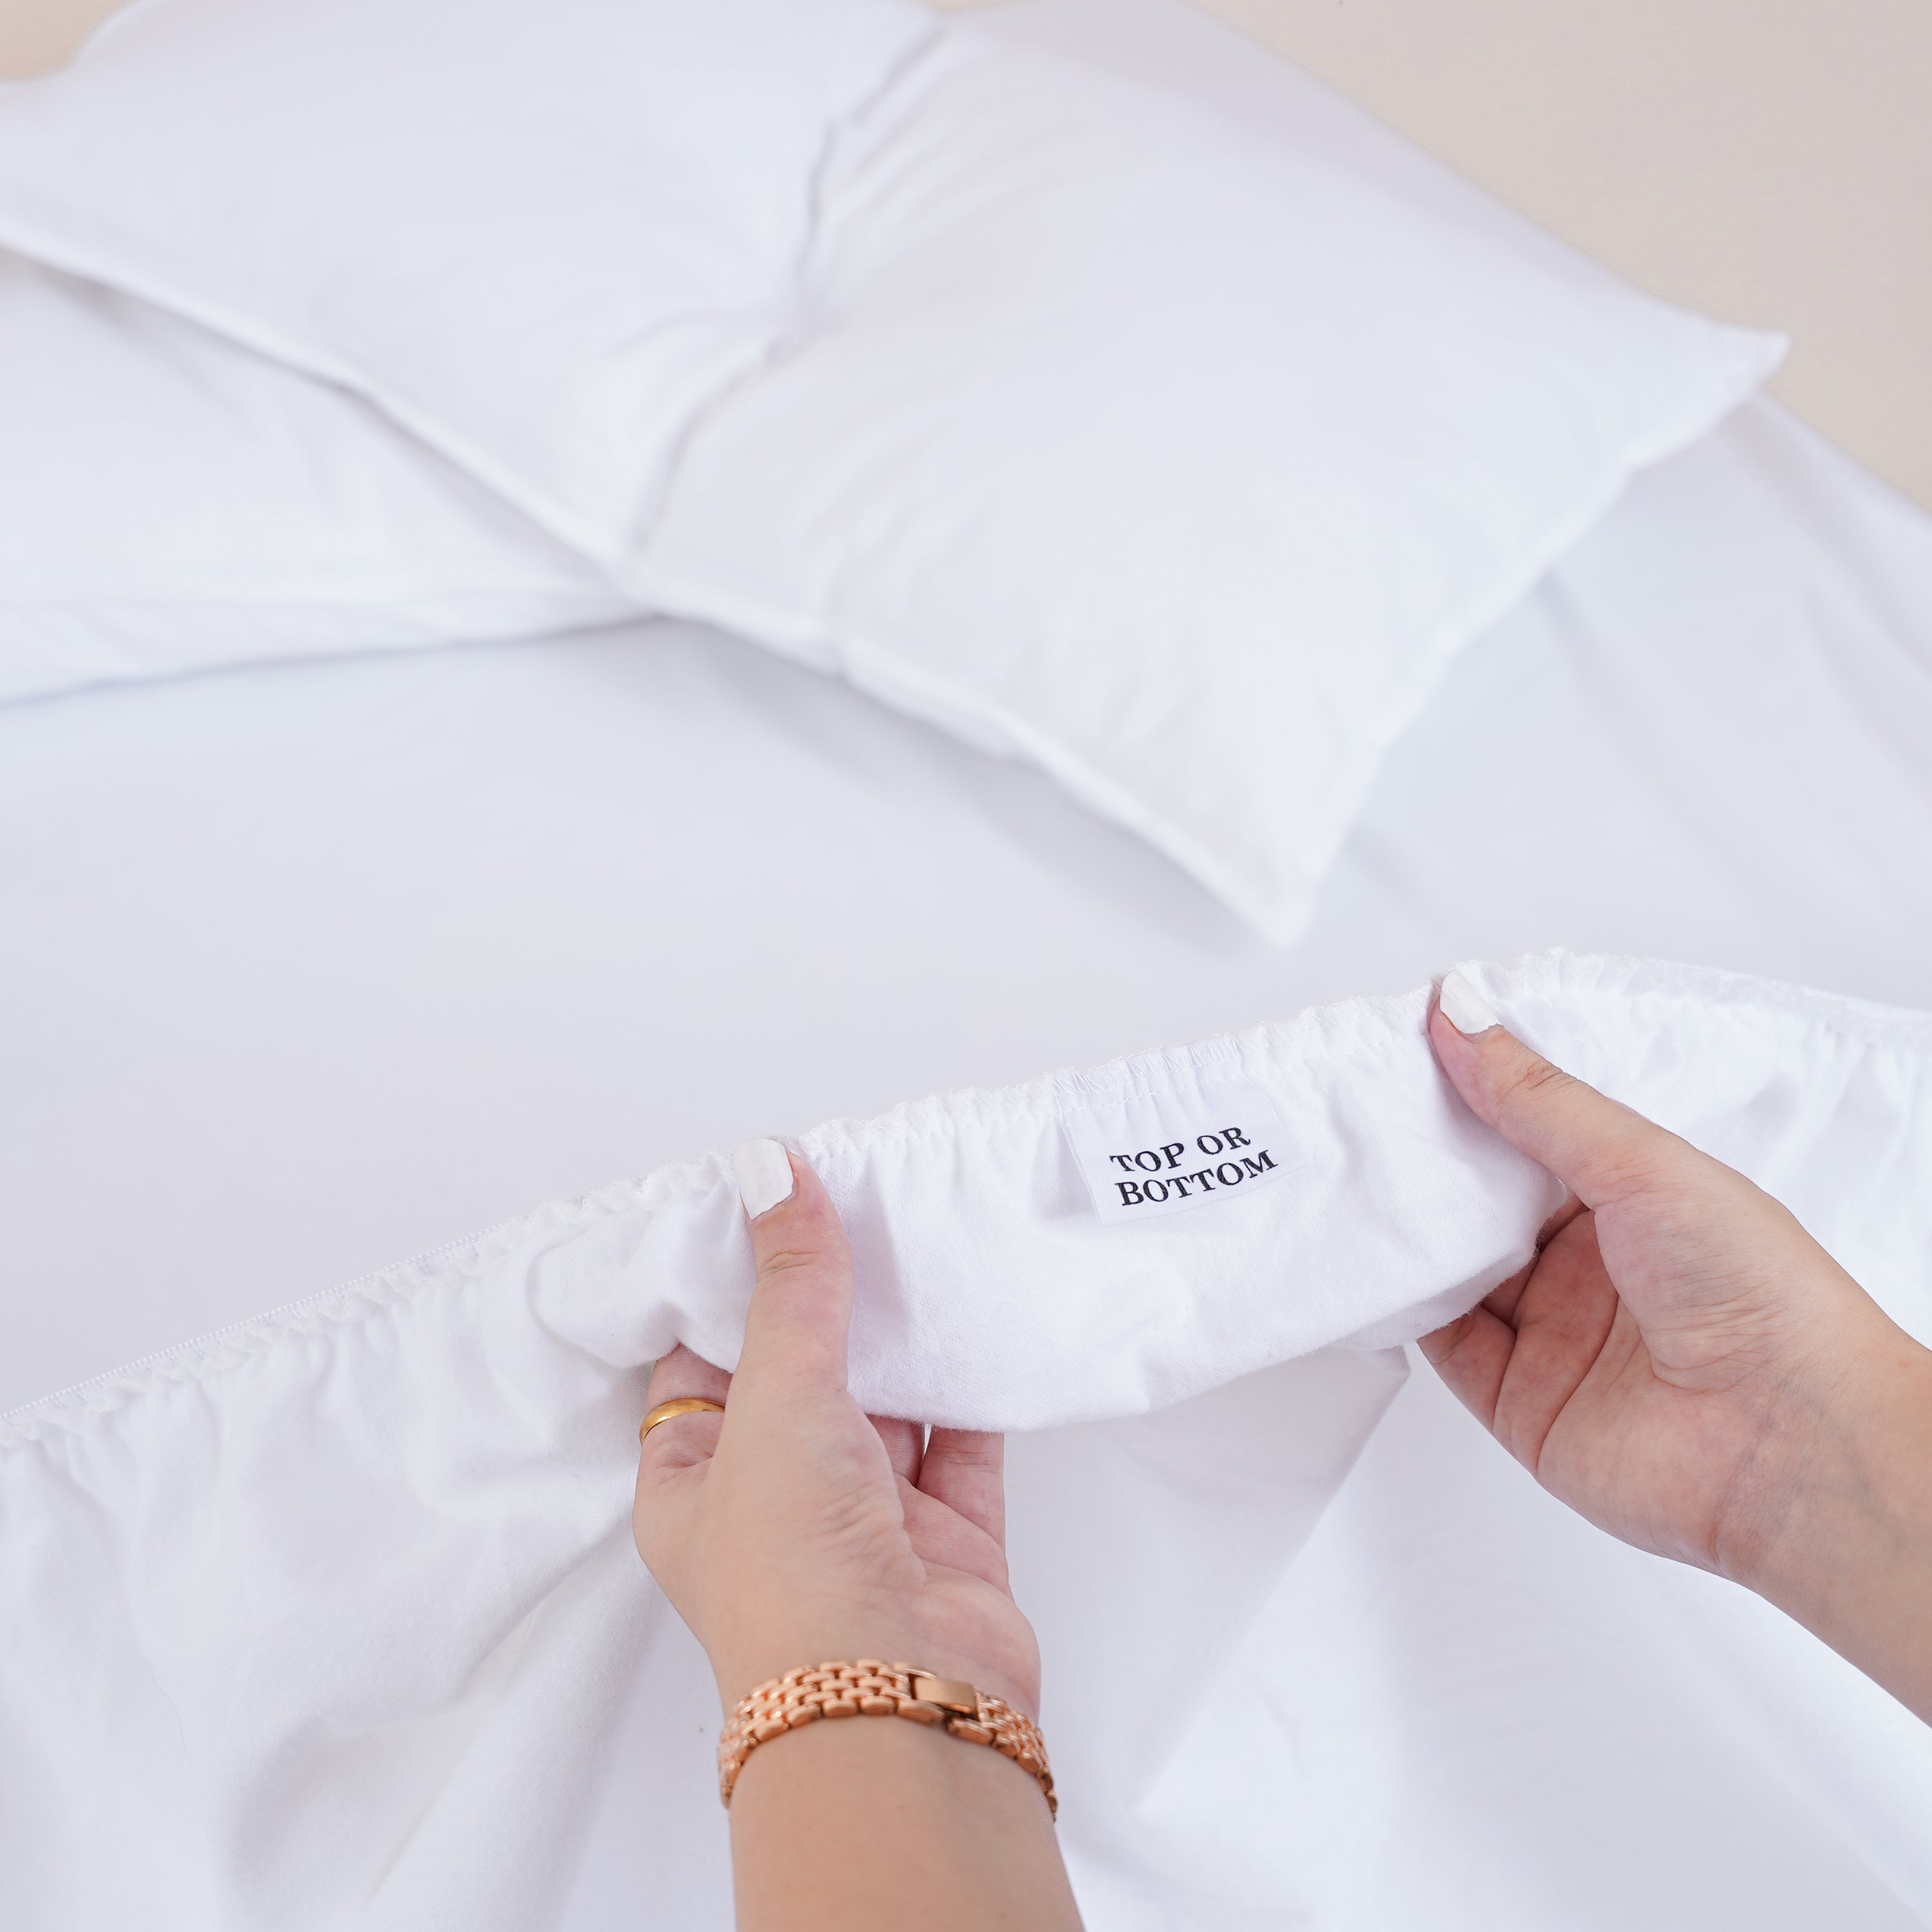 Bella Flanellette - White Fitted Sheet